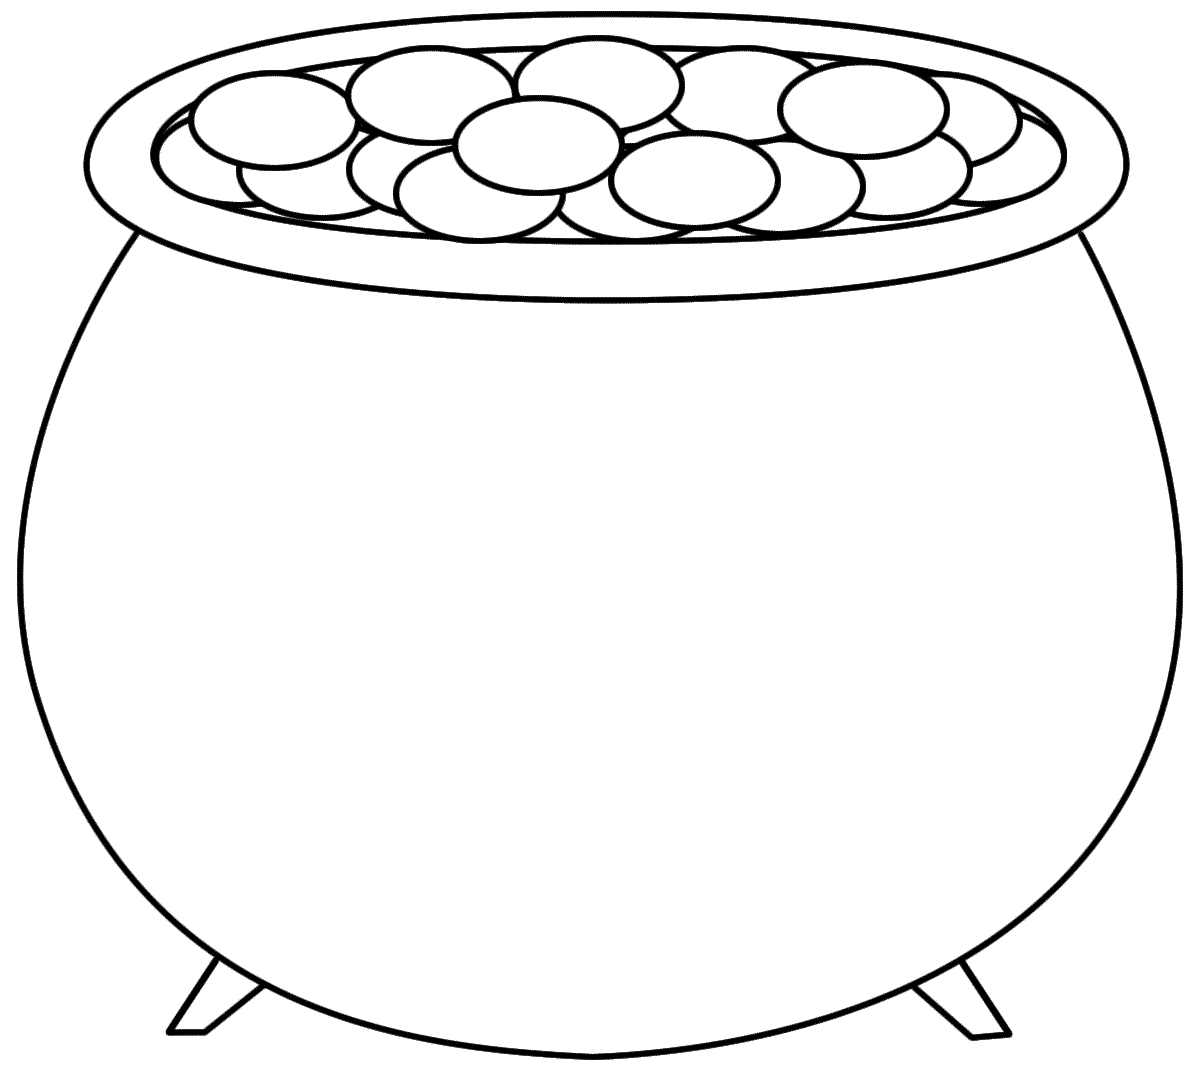 Rainbow Pot Of Gold Coloring Page - Free Clipart ...